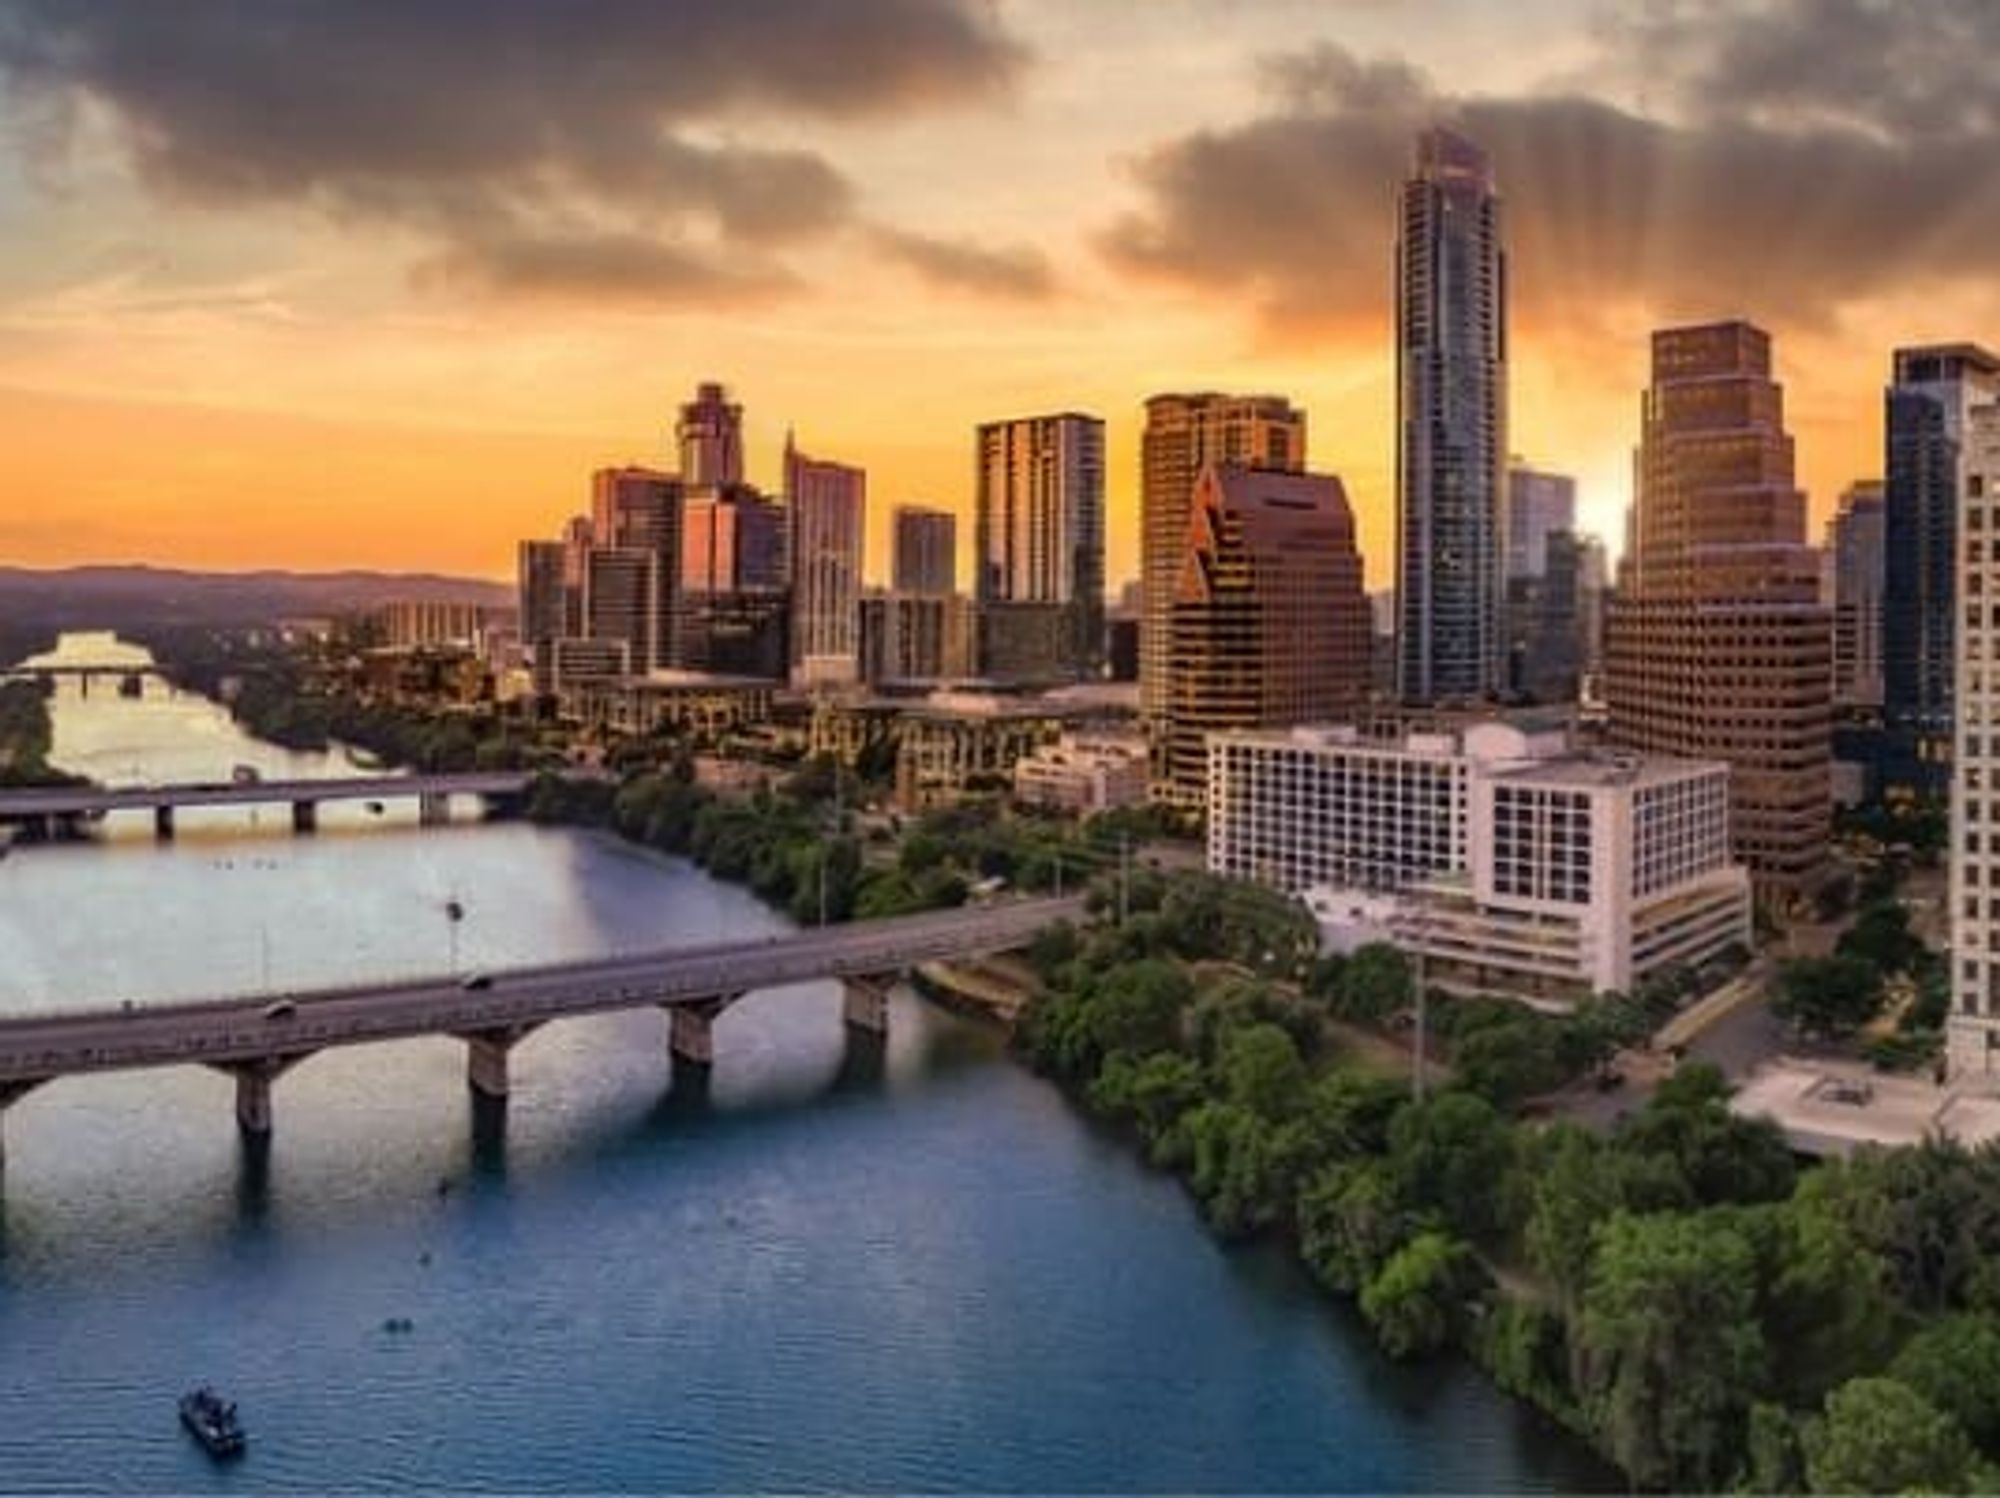 Considering Austin’s population has just about doubled in the last two decades, the housing market’s skyrocketing growth was inevitable. Photo courtesy of SmartAsset